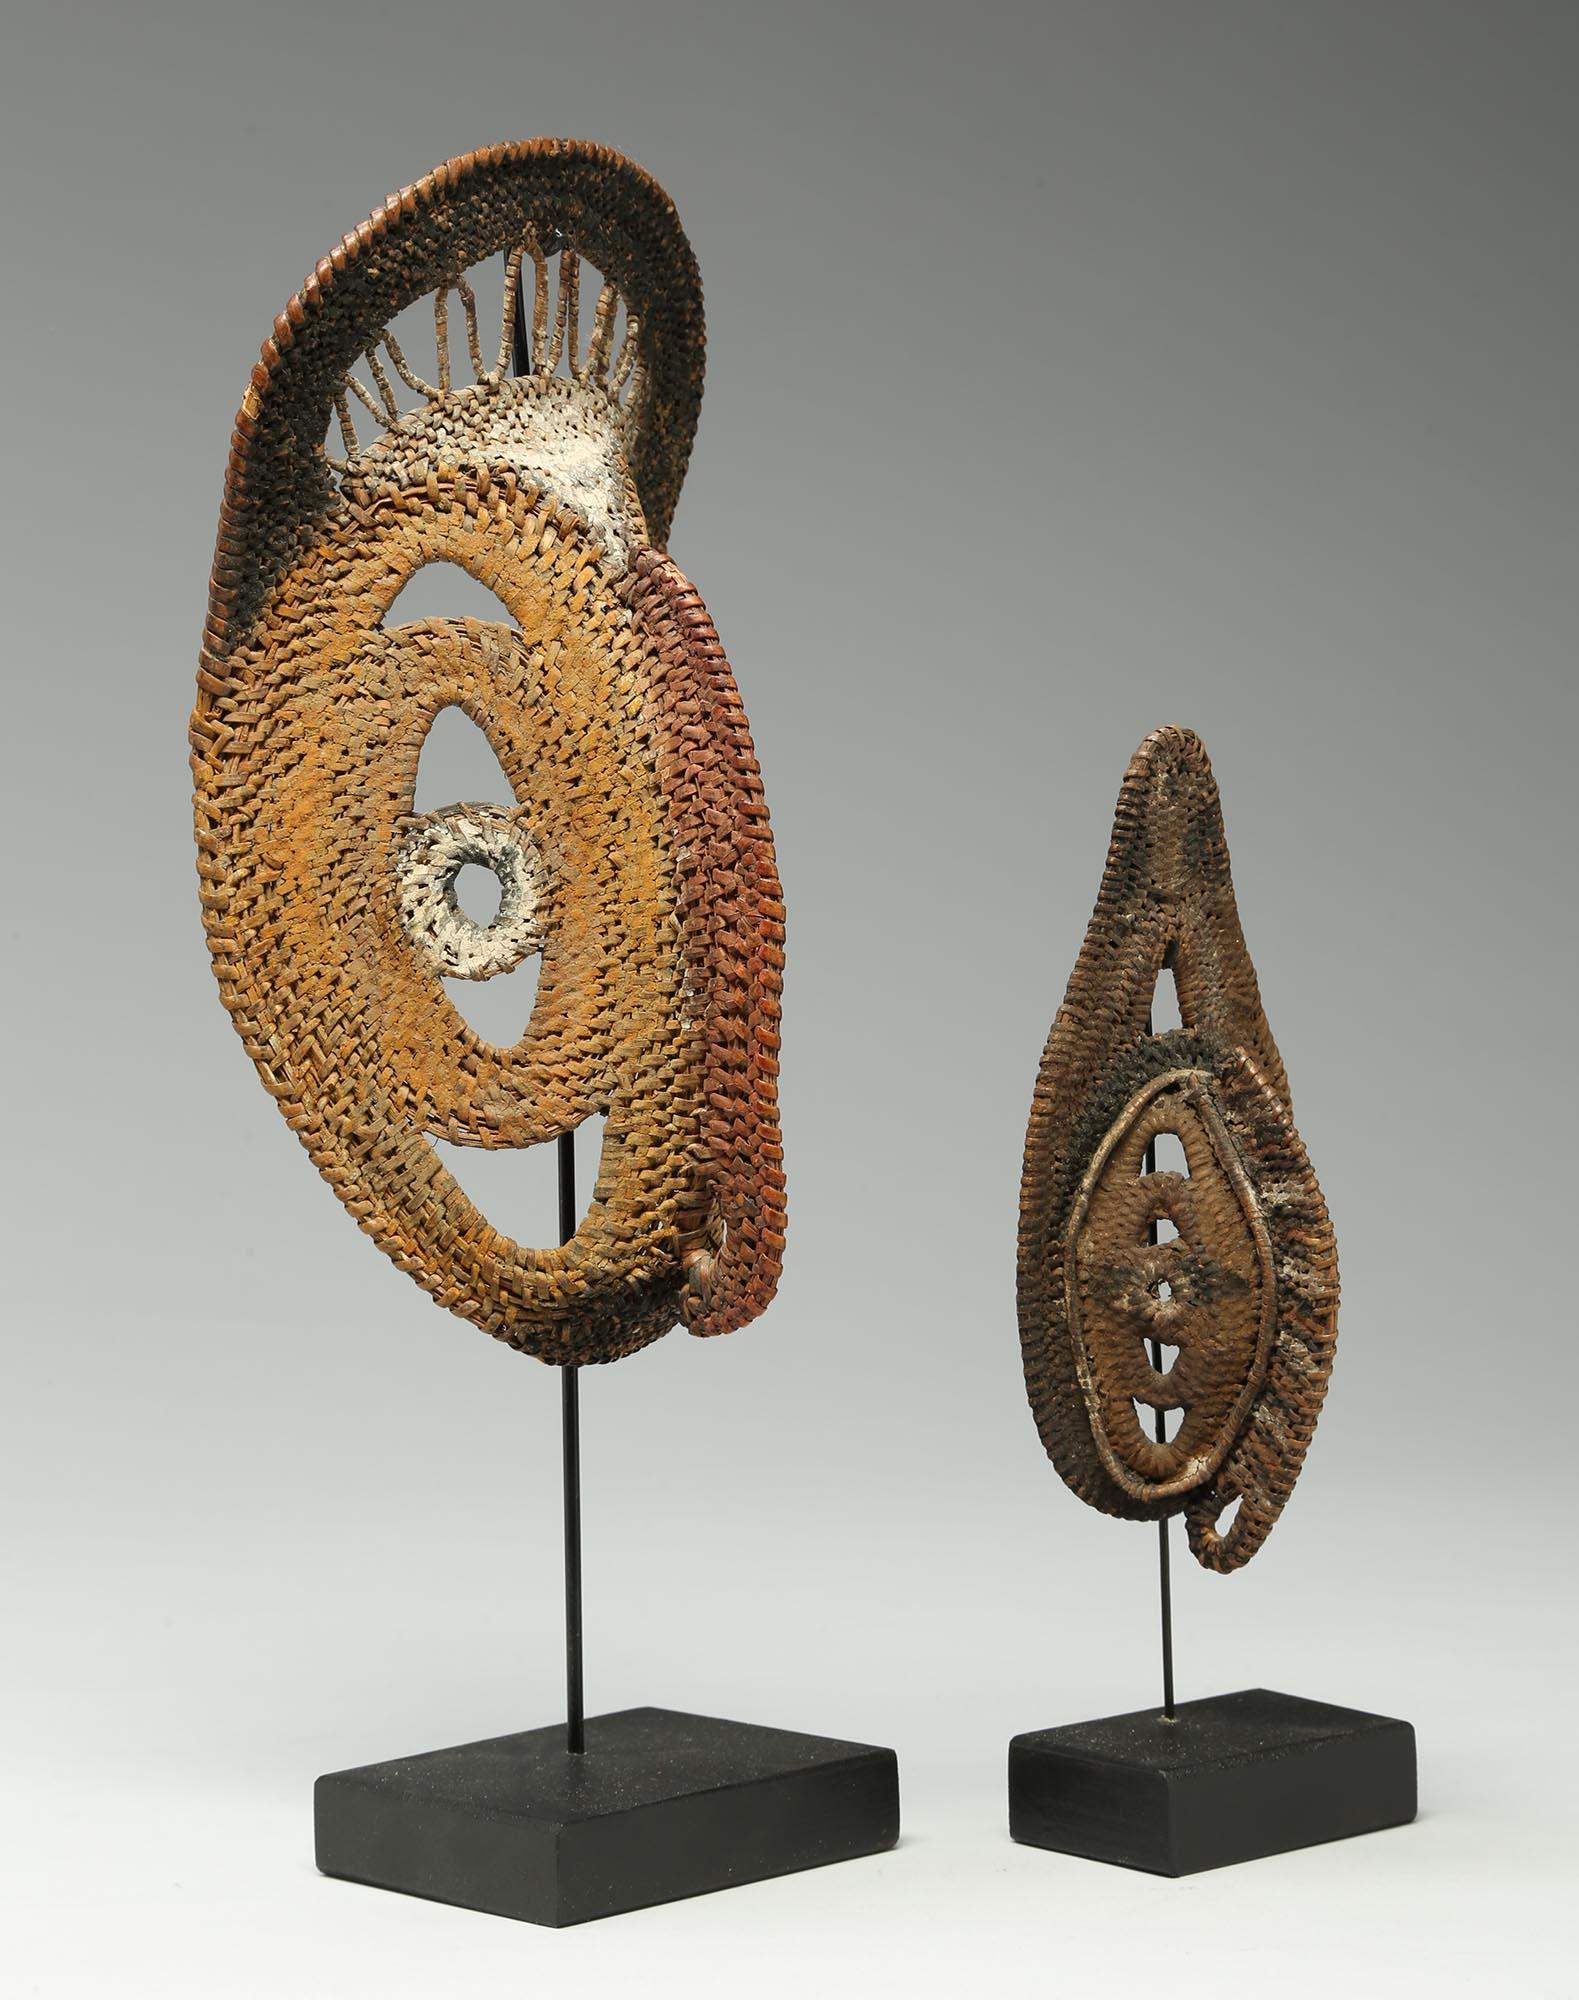 Two small tightly woven Basketry New Guinea Yam masks, with incrusted paints and surfaces. Used to decorate large yams during the annual harvest ceremonies. Great expressive small artworks. Each on a hanging wood and metal base as shown. Measures: